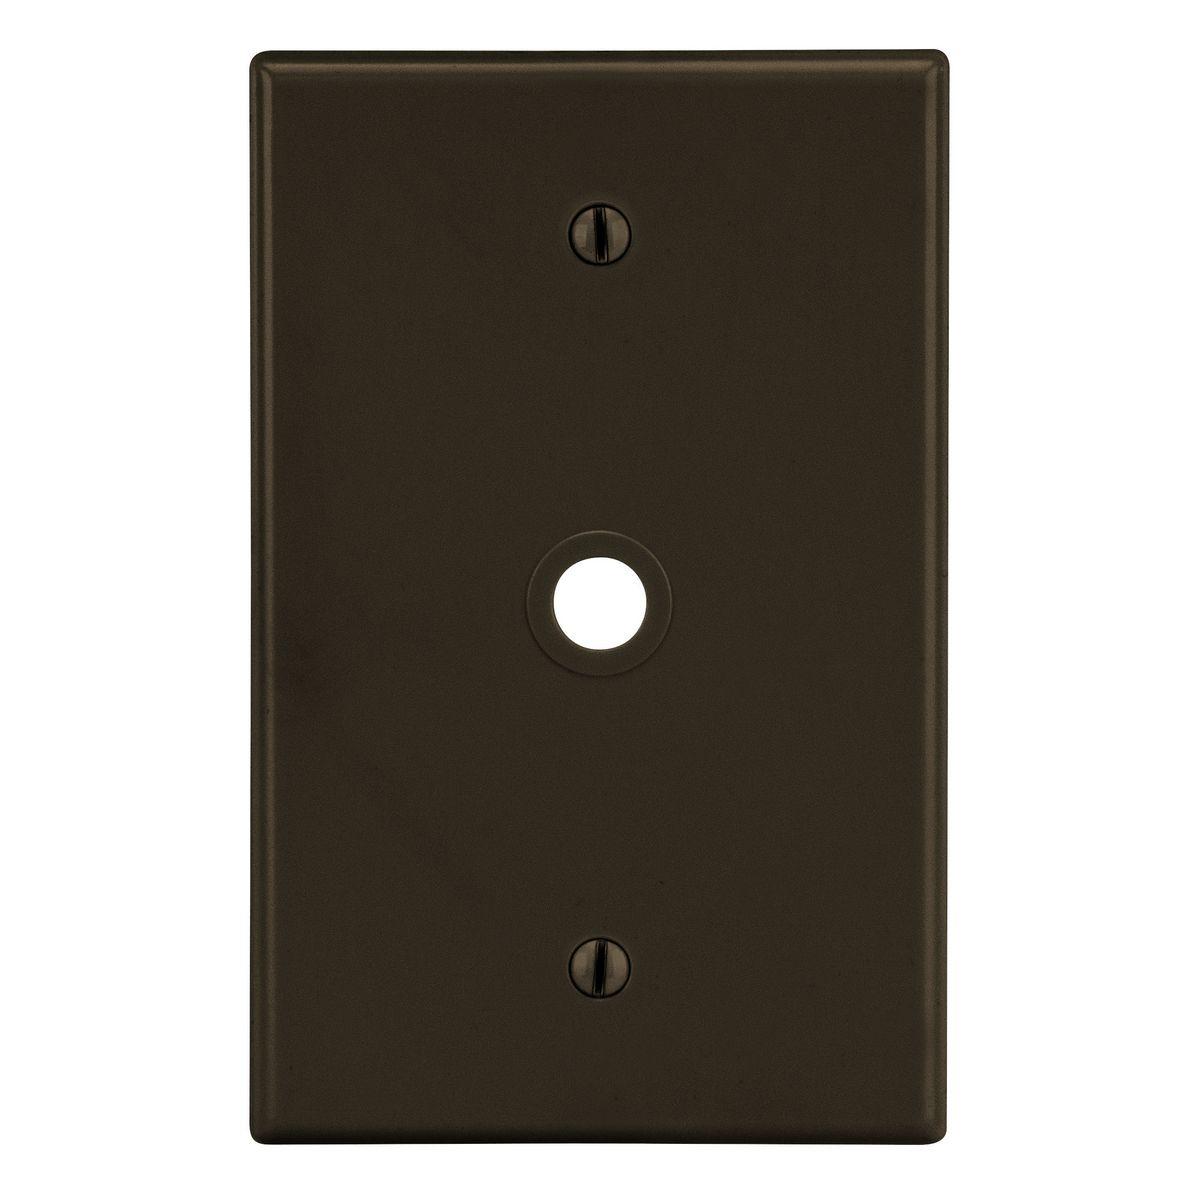 Hubbell PJ11 Wallplate, Mid-Size 1-Gang, .406" Opening, Box Mount, Brown  ; High-impact, self-extinguishing polycarbonate material ; More Rigid ; Sharp lines and less dimpling ; Smooth satin finish ; Blends into wall with an optimum finish ; Smooth Satin Finish